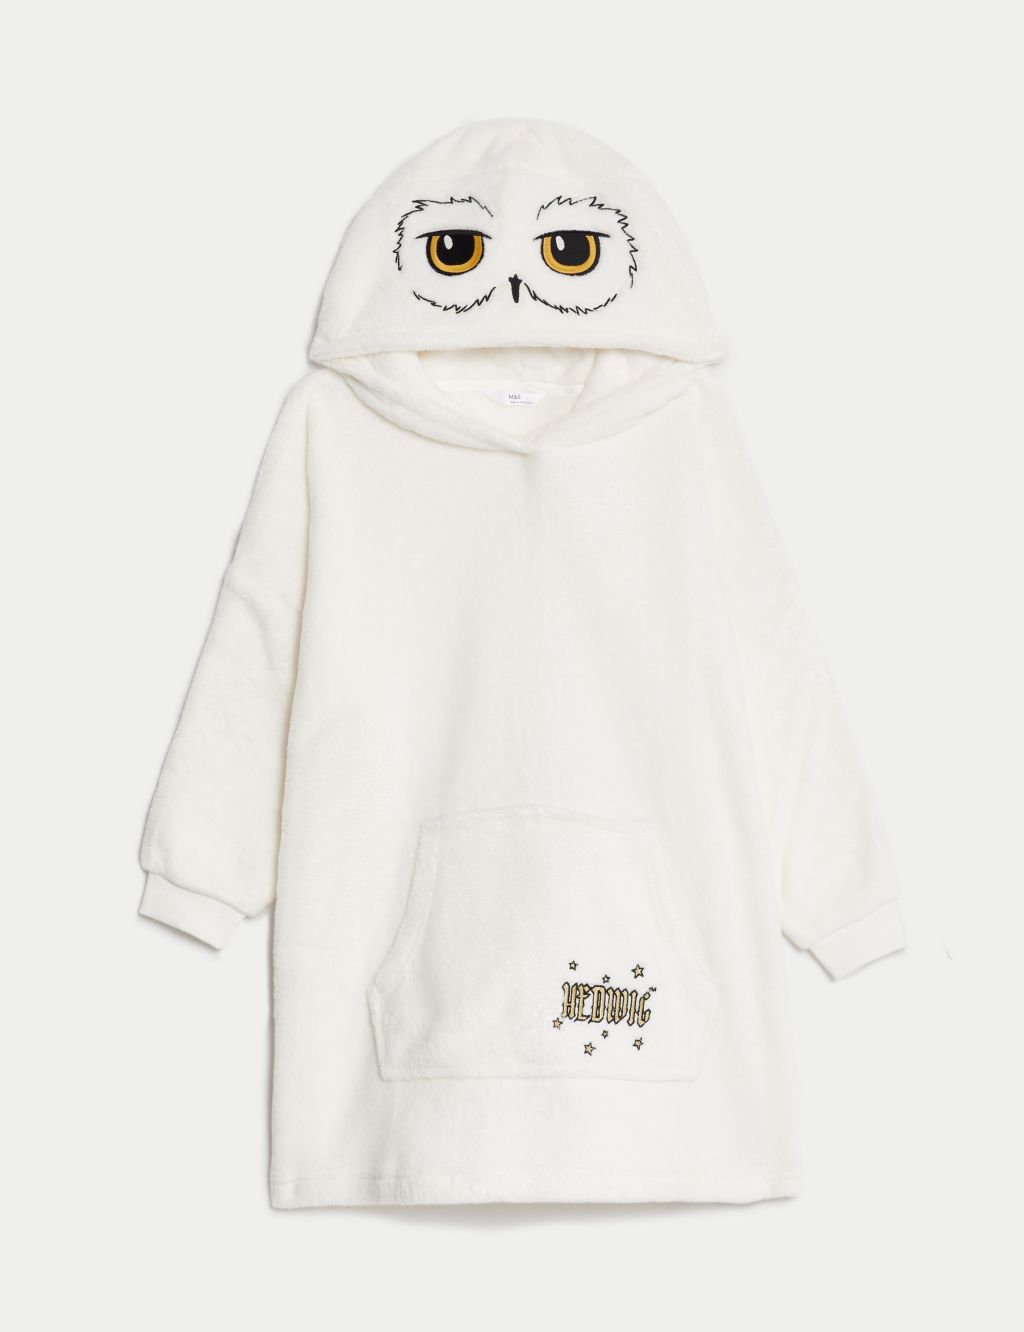 Harry Potter™ Hedwig Oversized Hoodie (7-16 Yrs) image 1